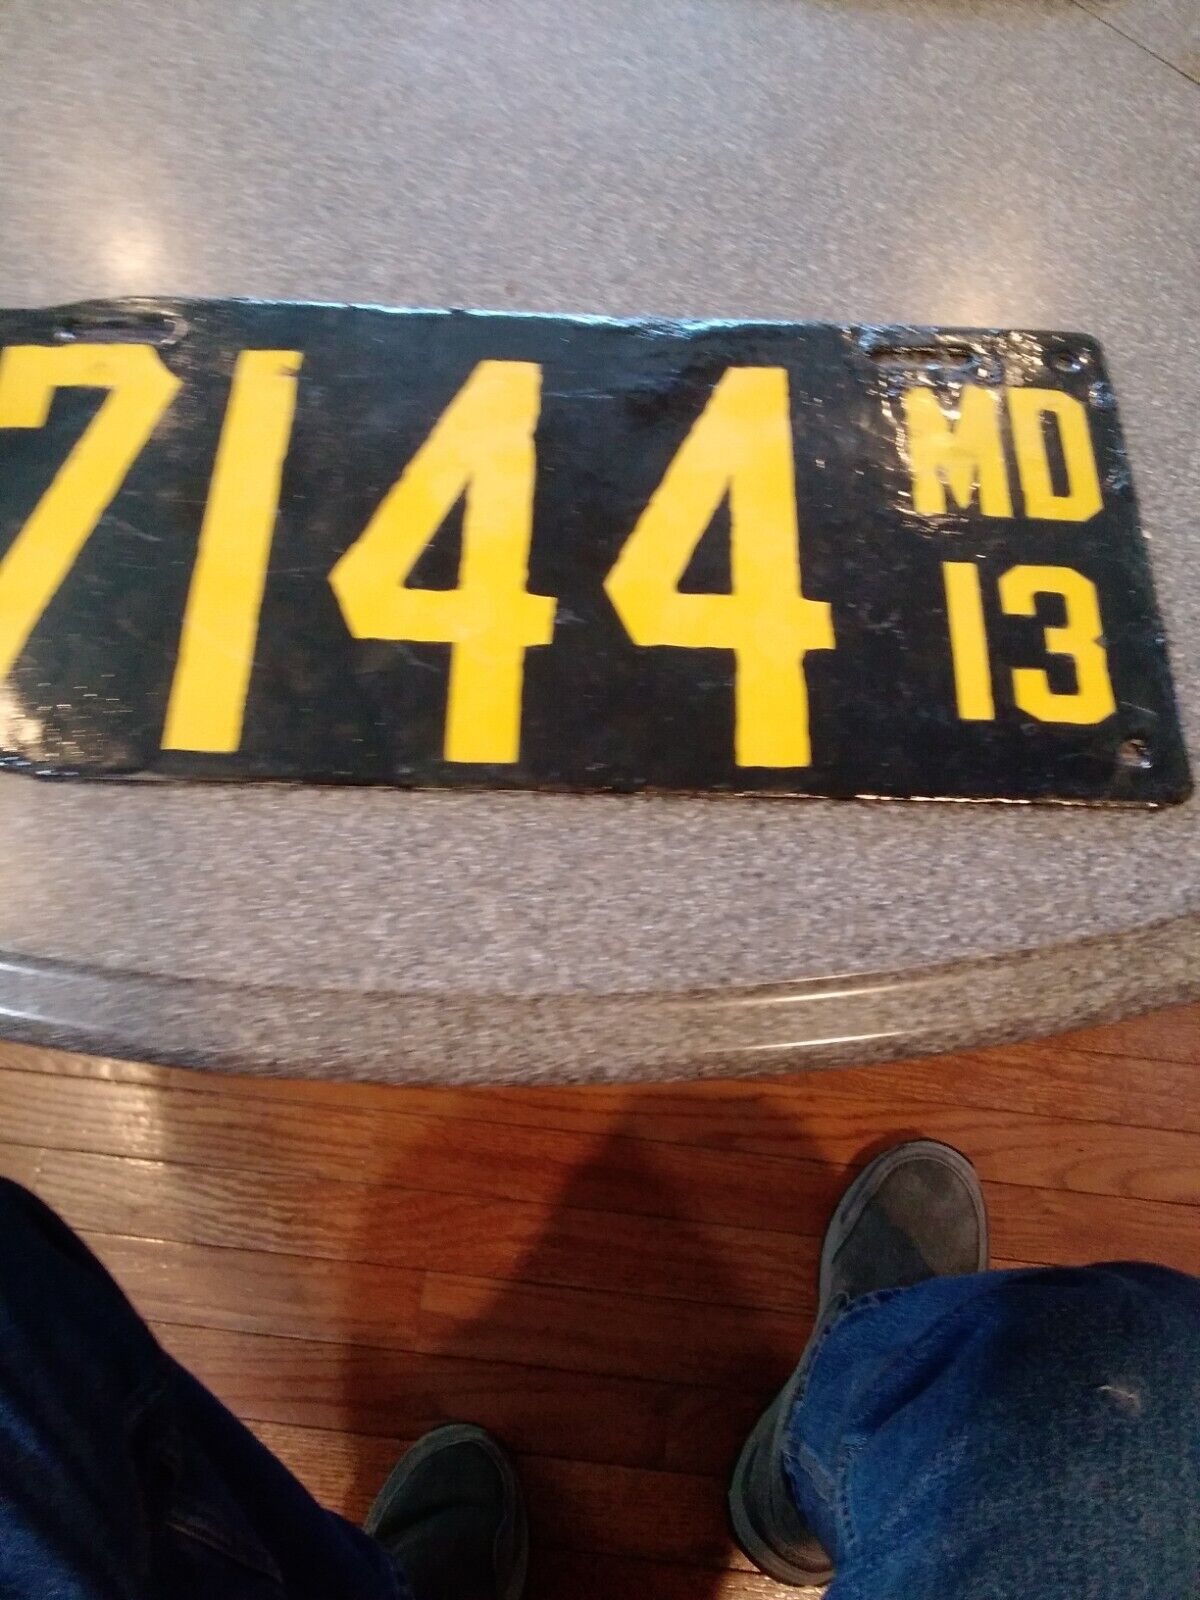 1913 Maryland MD Porcelain License Plate Car Auto Tag Seal On Back Baltimore 